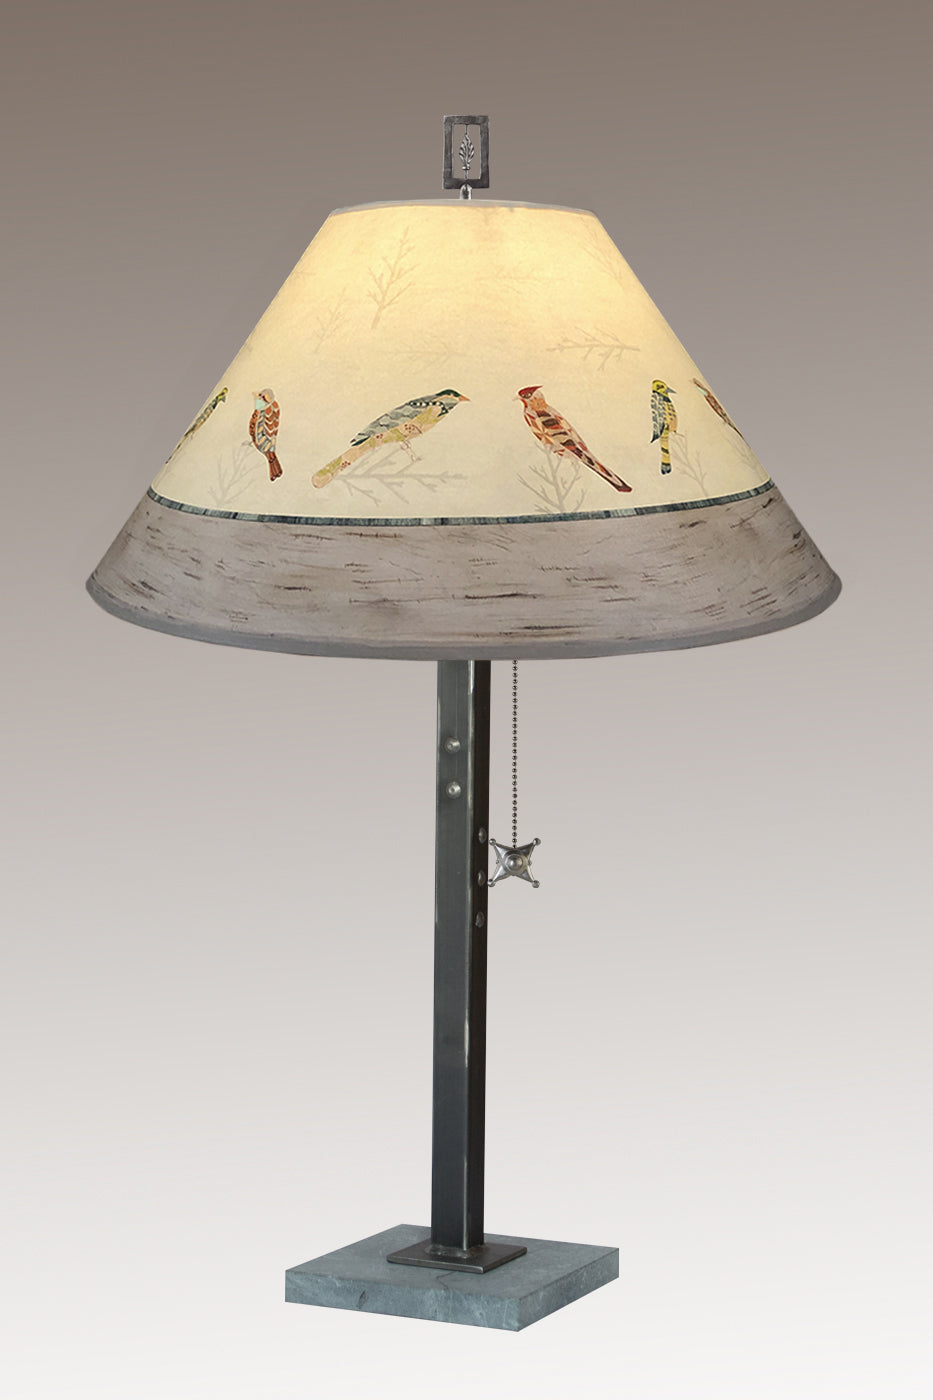 Janna Ugone & Co Table Lamps Steel Table Lamp with Large Conical Shade in Bird Friends